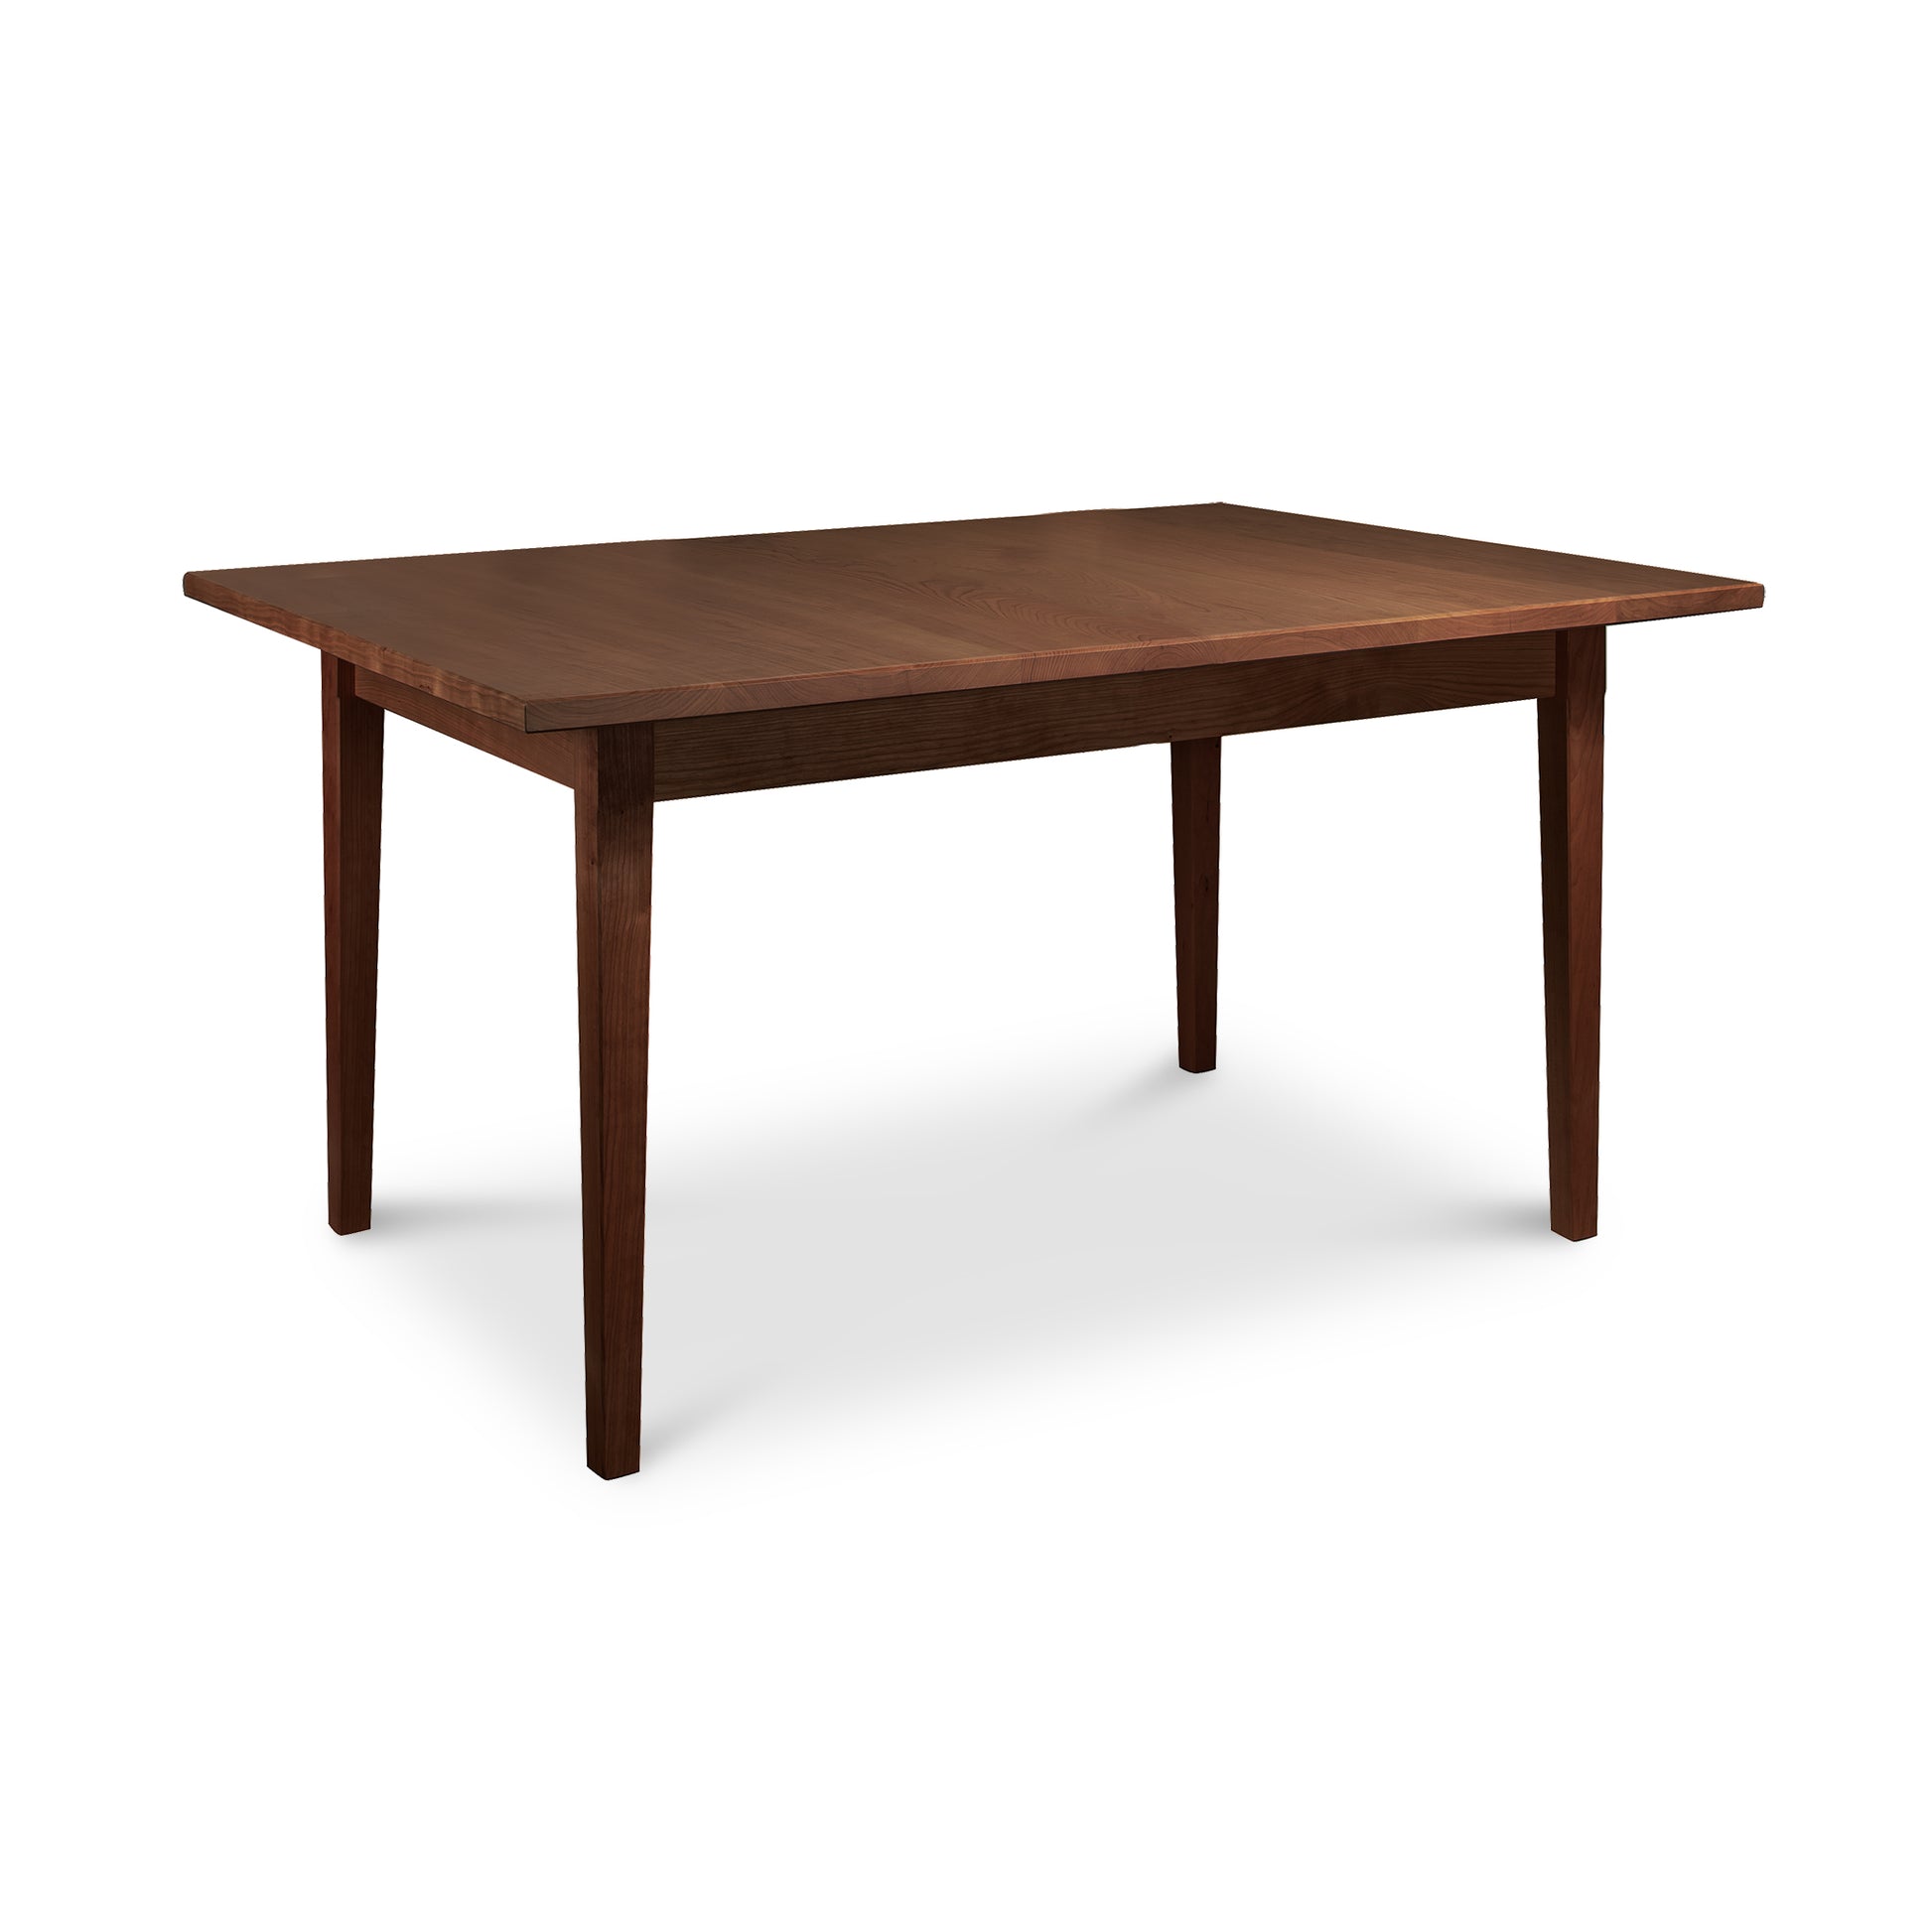 A simple Vermont Shaker Rectangular Solid Top Dining Table with a rectangular top and four straight legs, isolated on a white background. The wood is stained in a rich, dark brown color.